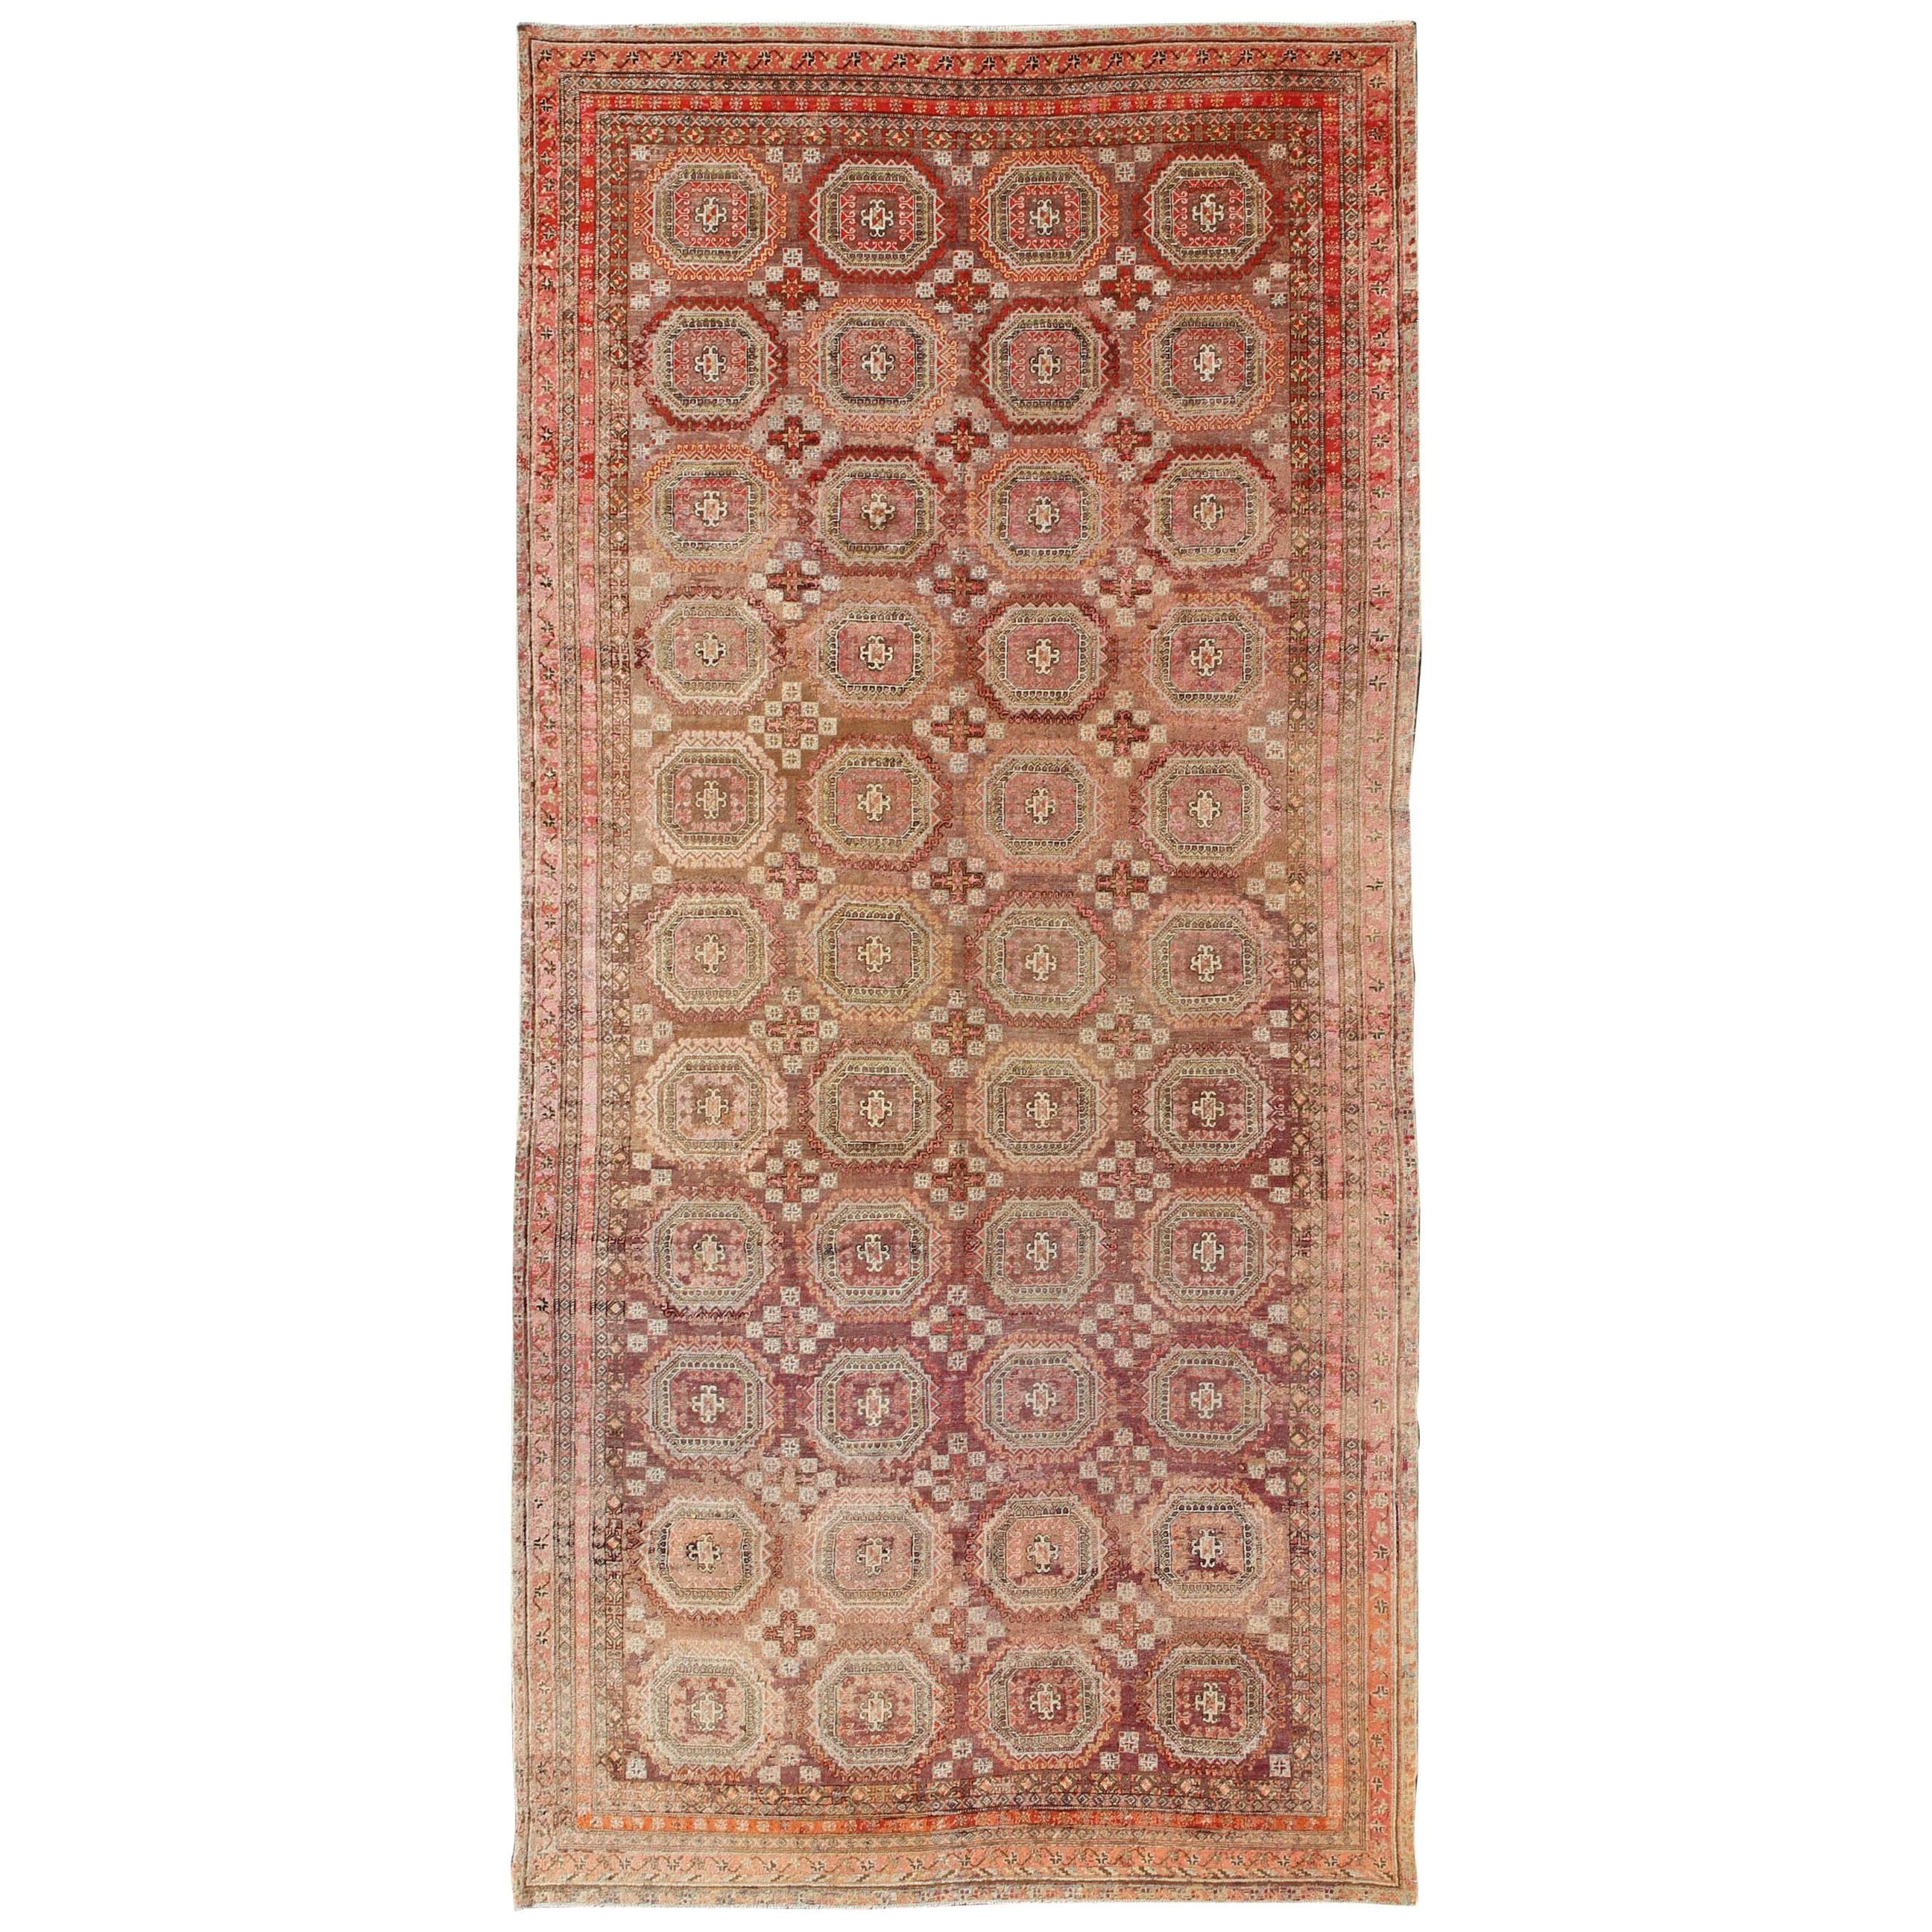 Antique Large Khotan Rug with Repeating Medallion Design in Maroon / Red For Sale